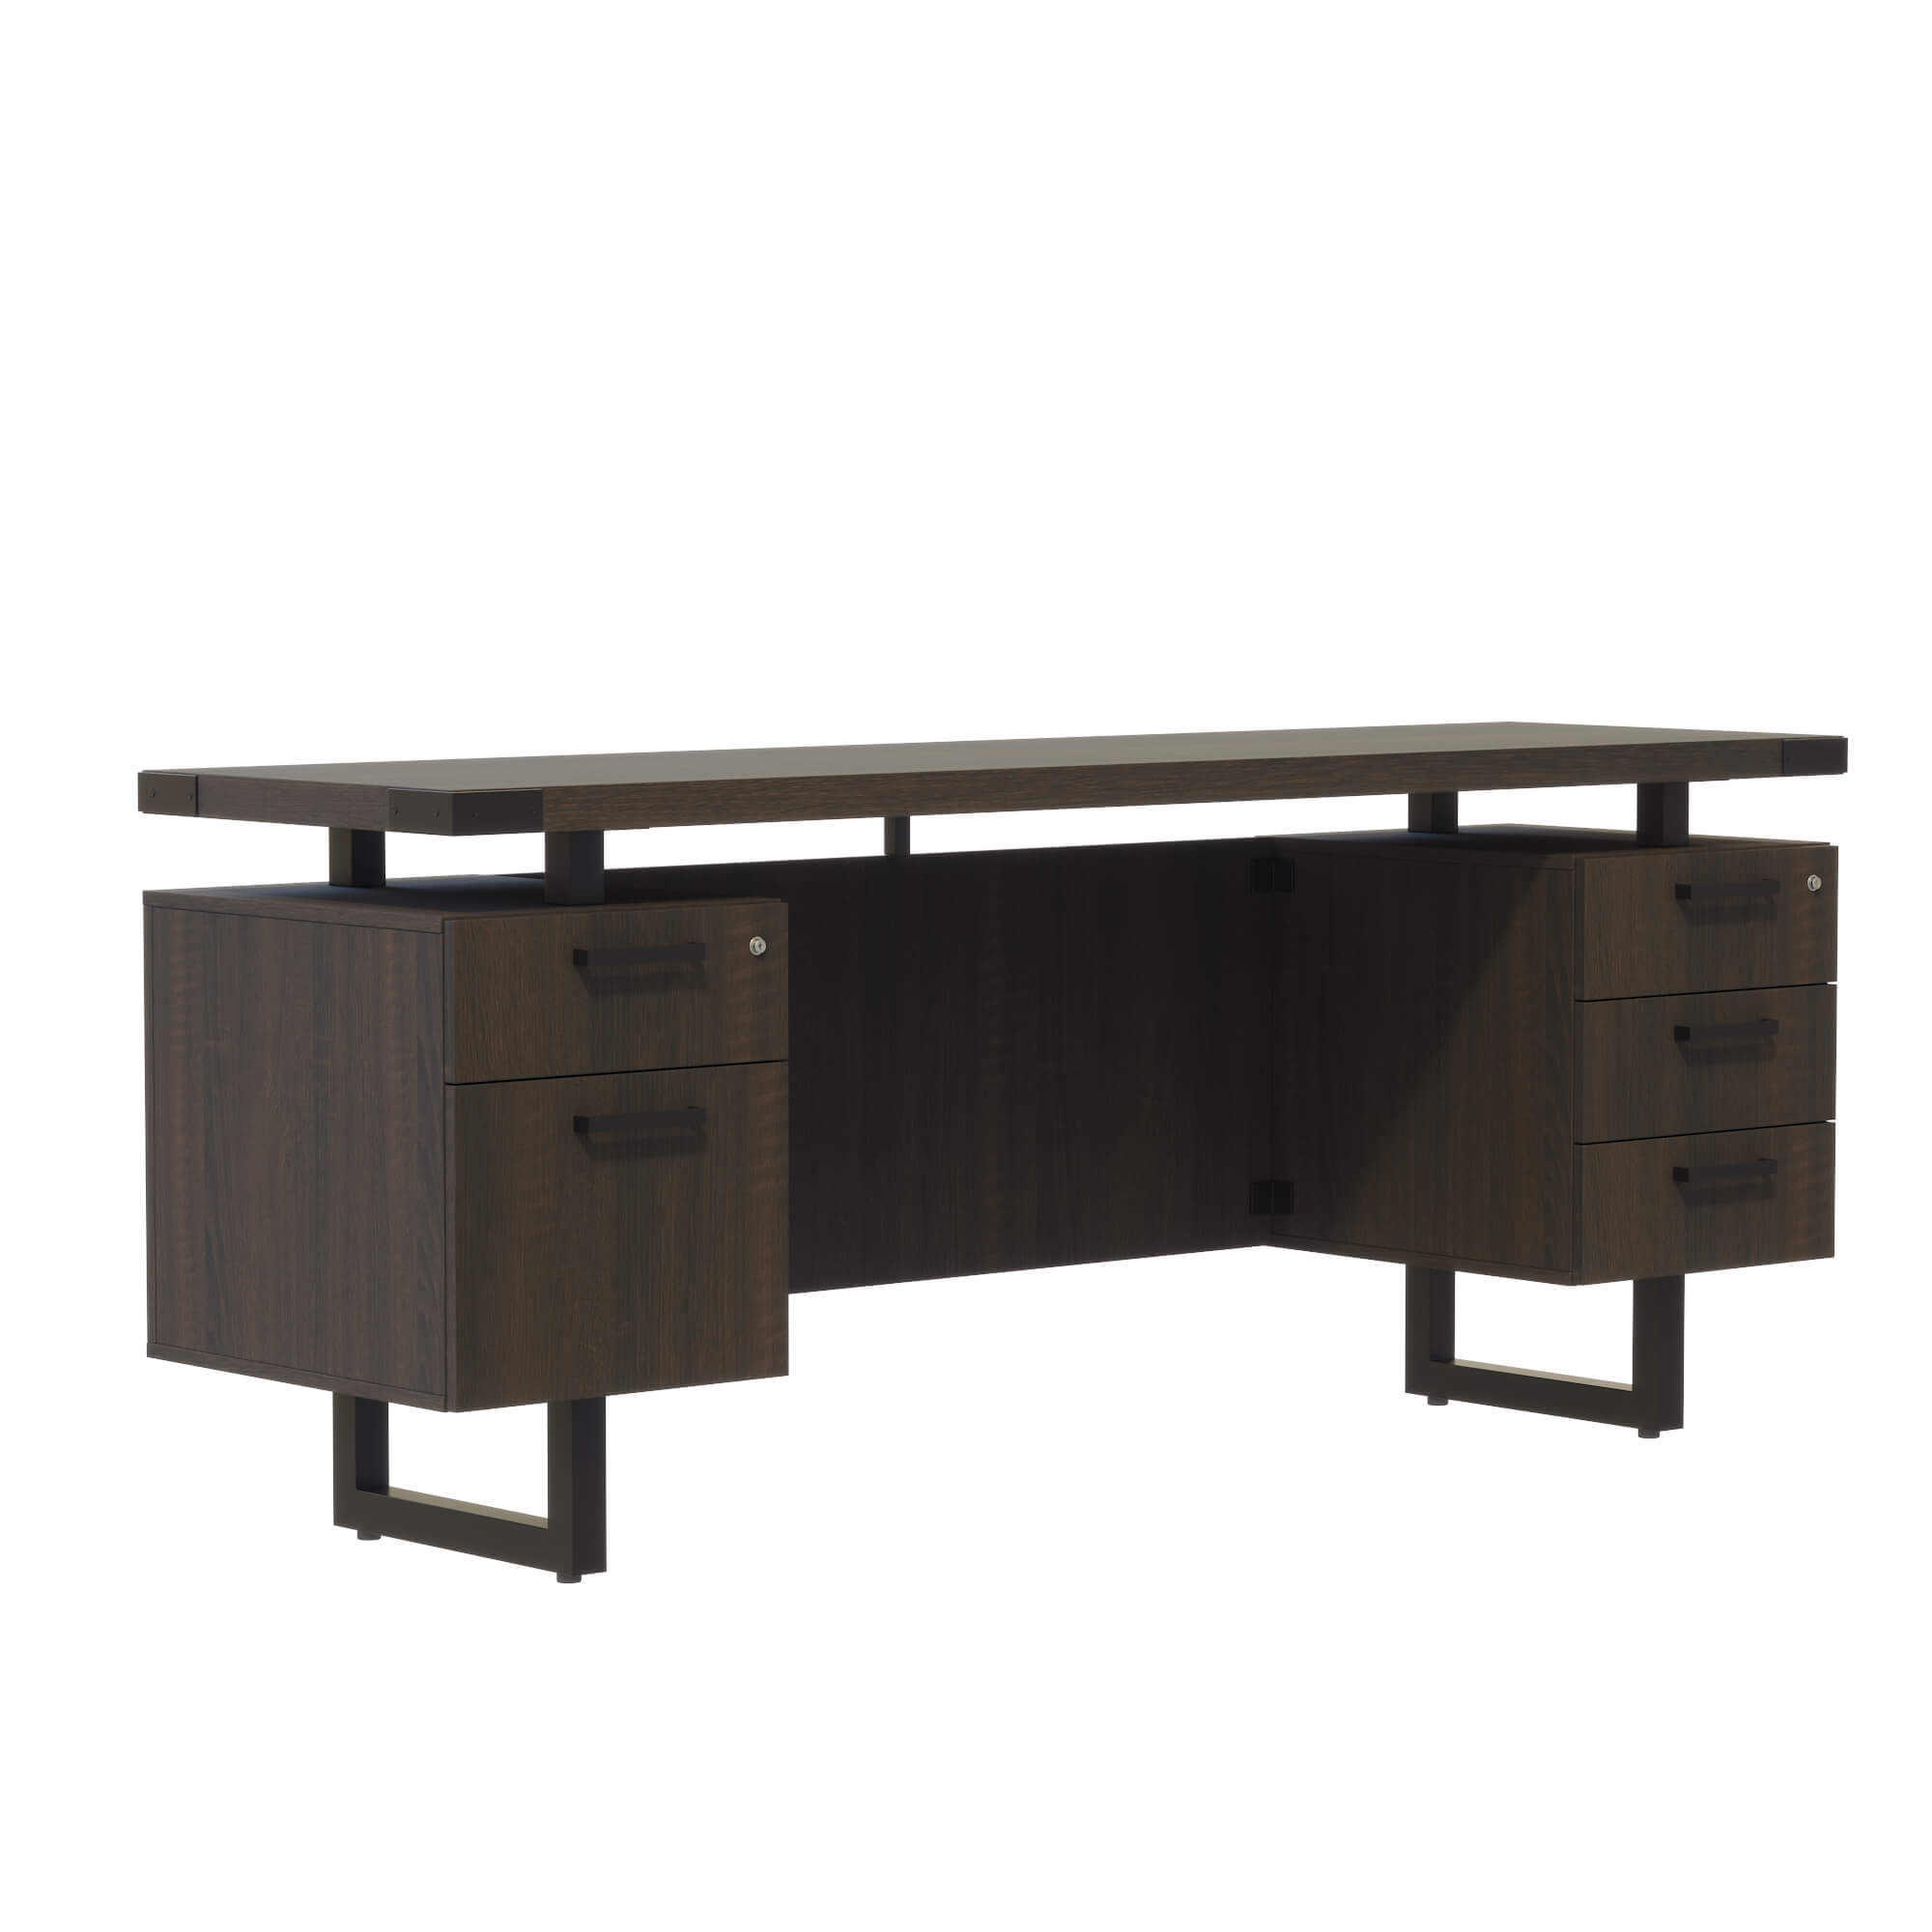 Home office ideas ho4 home office furniture desk credenza 1 2